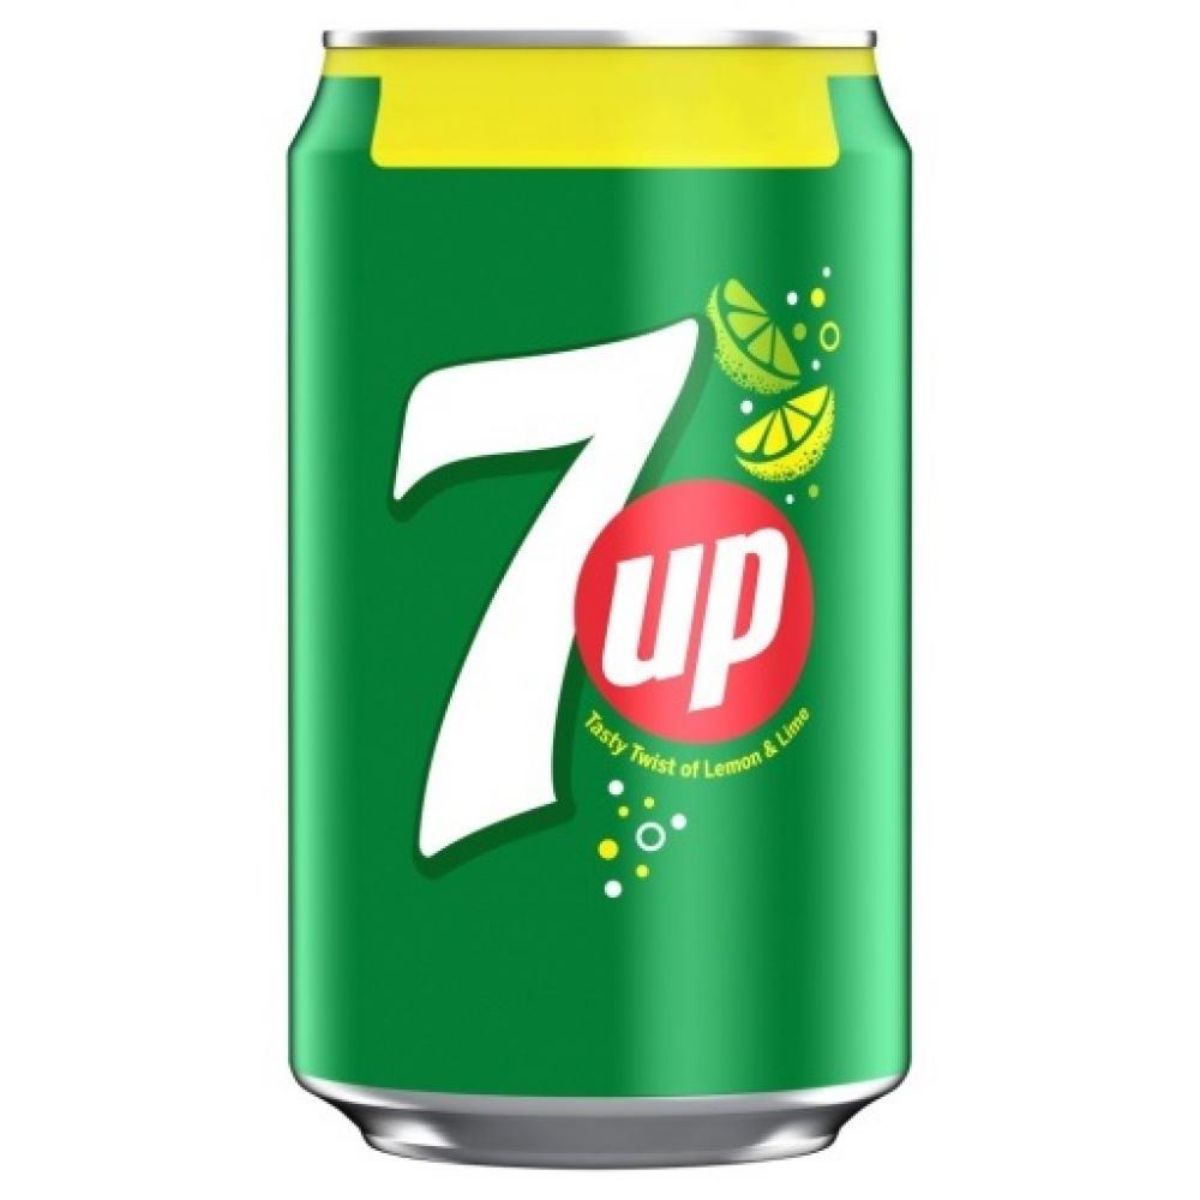 A can of 7up - Regular Can - 330ml lemonade on a white background.